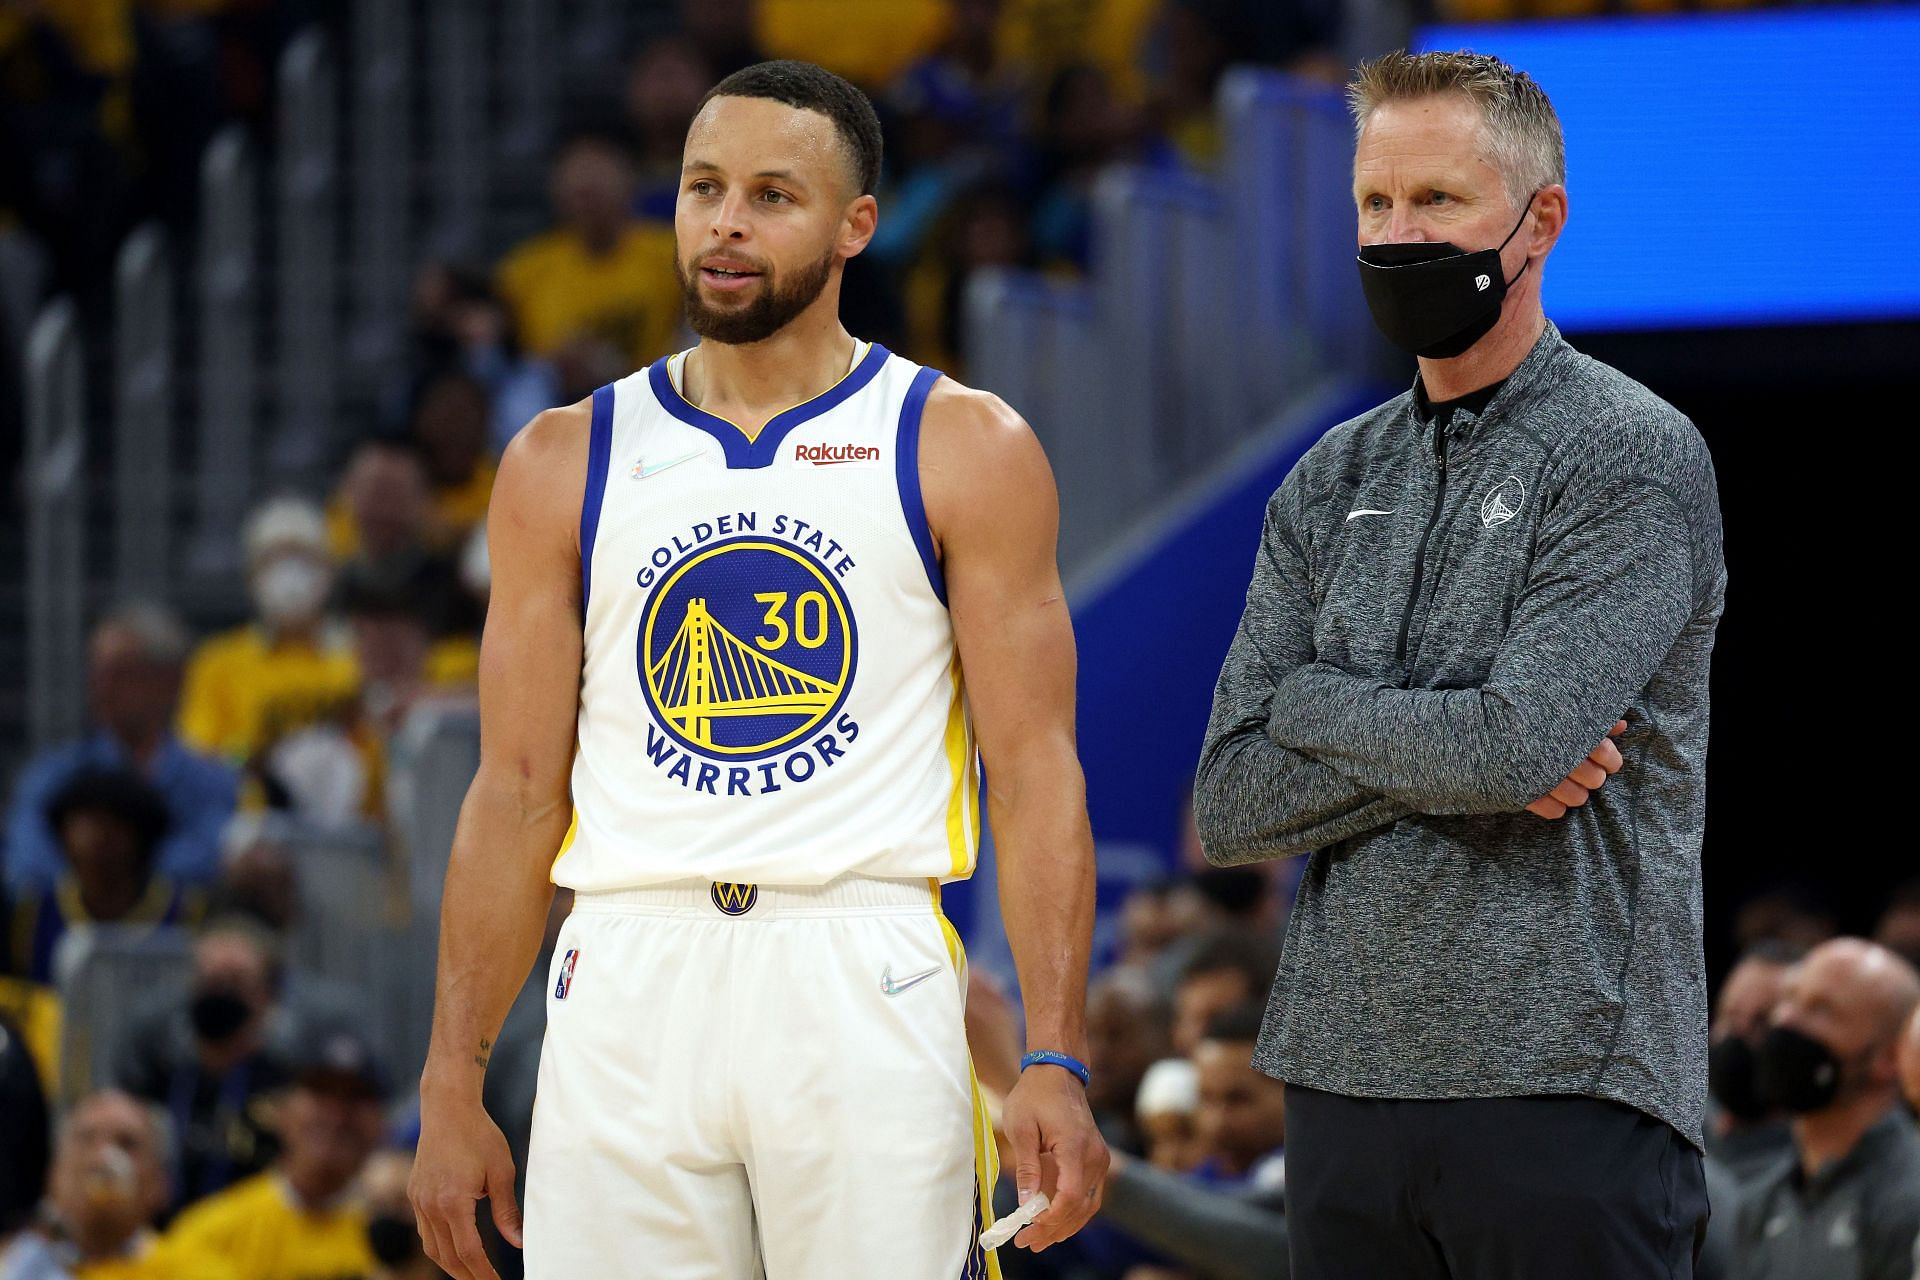 Steph Curry and Steve Kerr during the Dallas Mavericks versus Golden State Warriors - Game 2